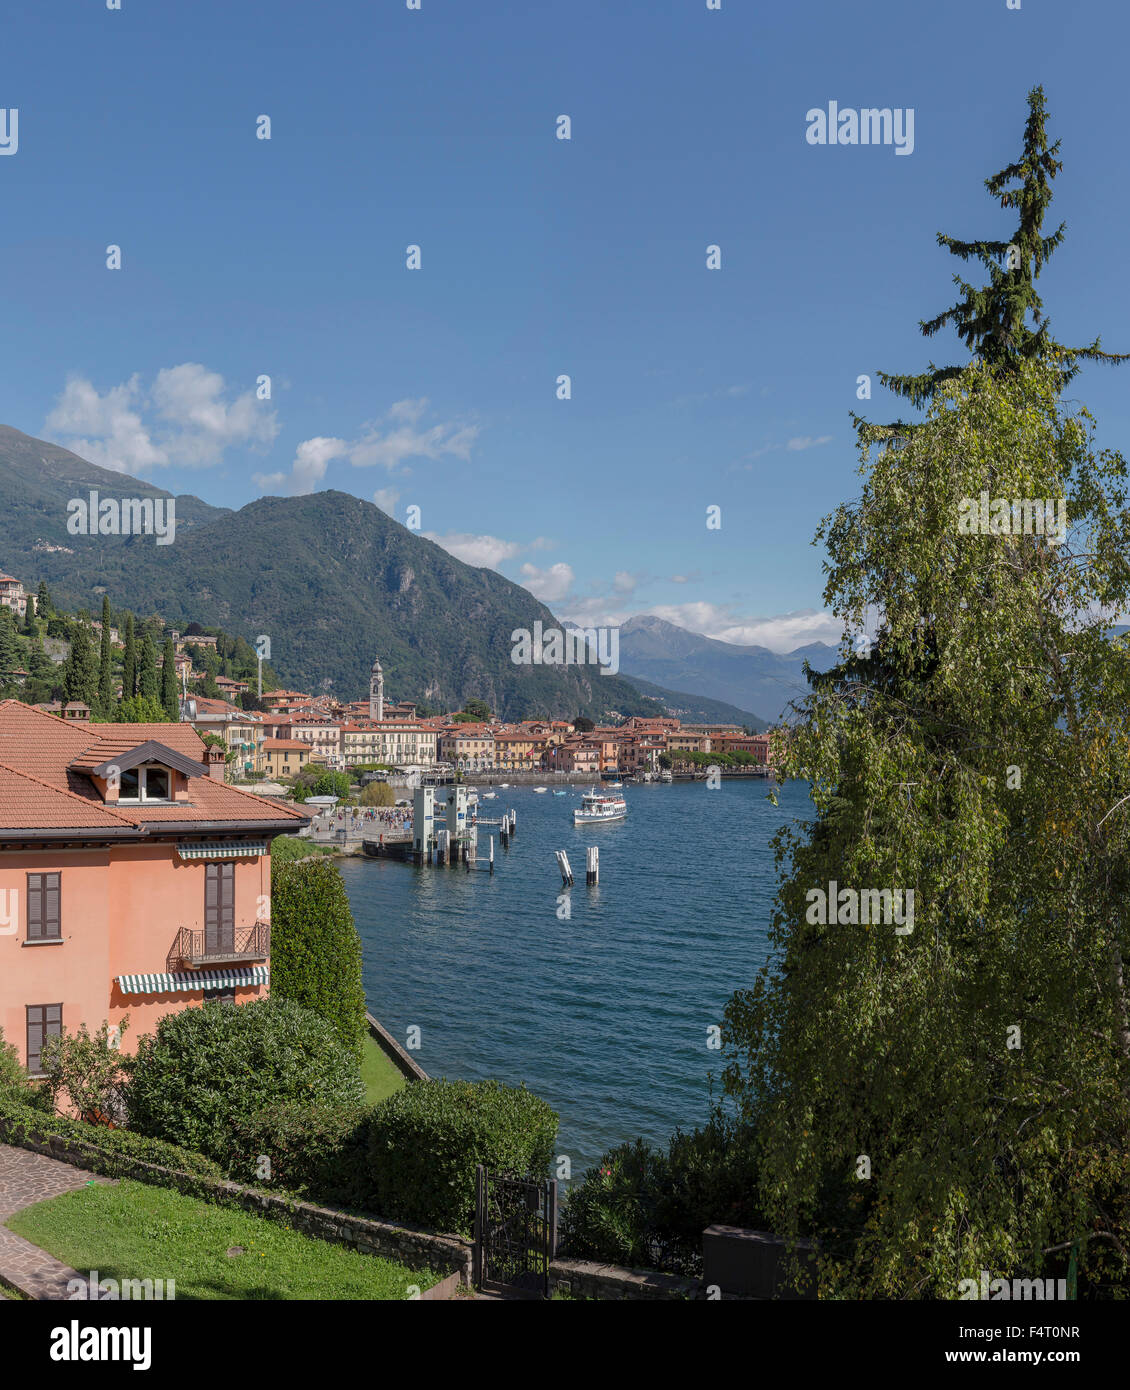 Italy, Europe, Menaggio, Lombardy, View, Lake Como, city, water, summer, mountains, lake, ships, boat, Stock Photo